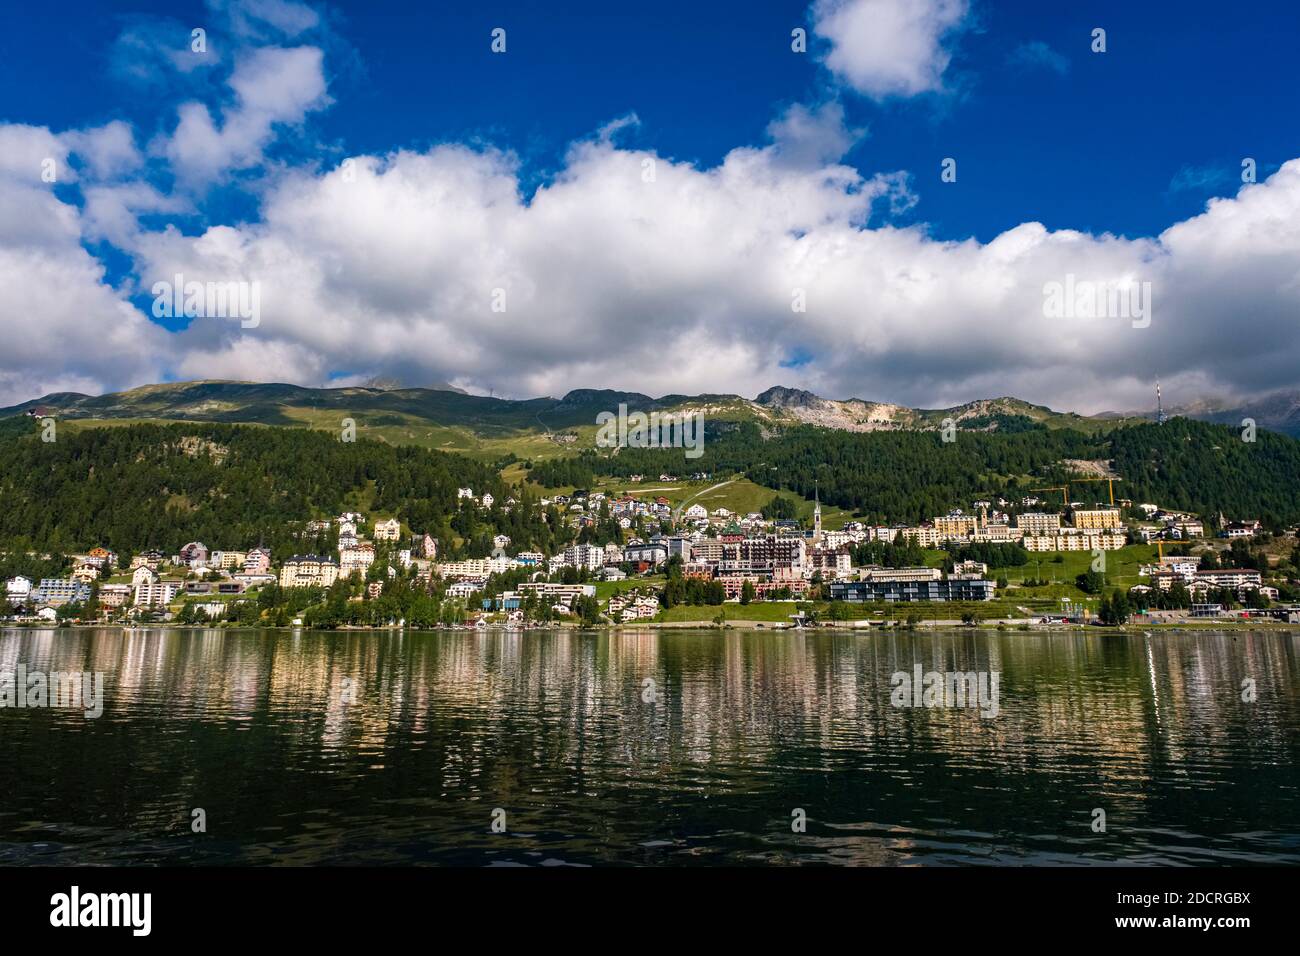 The town of St. Moritz is reflecting in the Lake St. Moritz, the southern slopes of the Albula Alps in the distance. Stock Photo